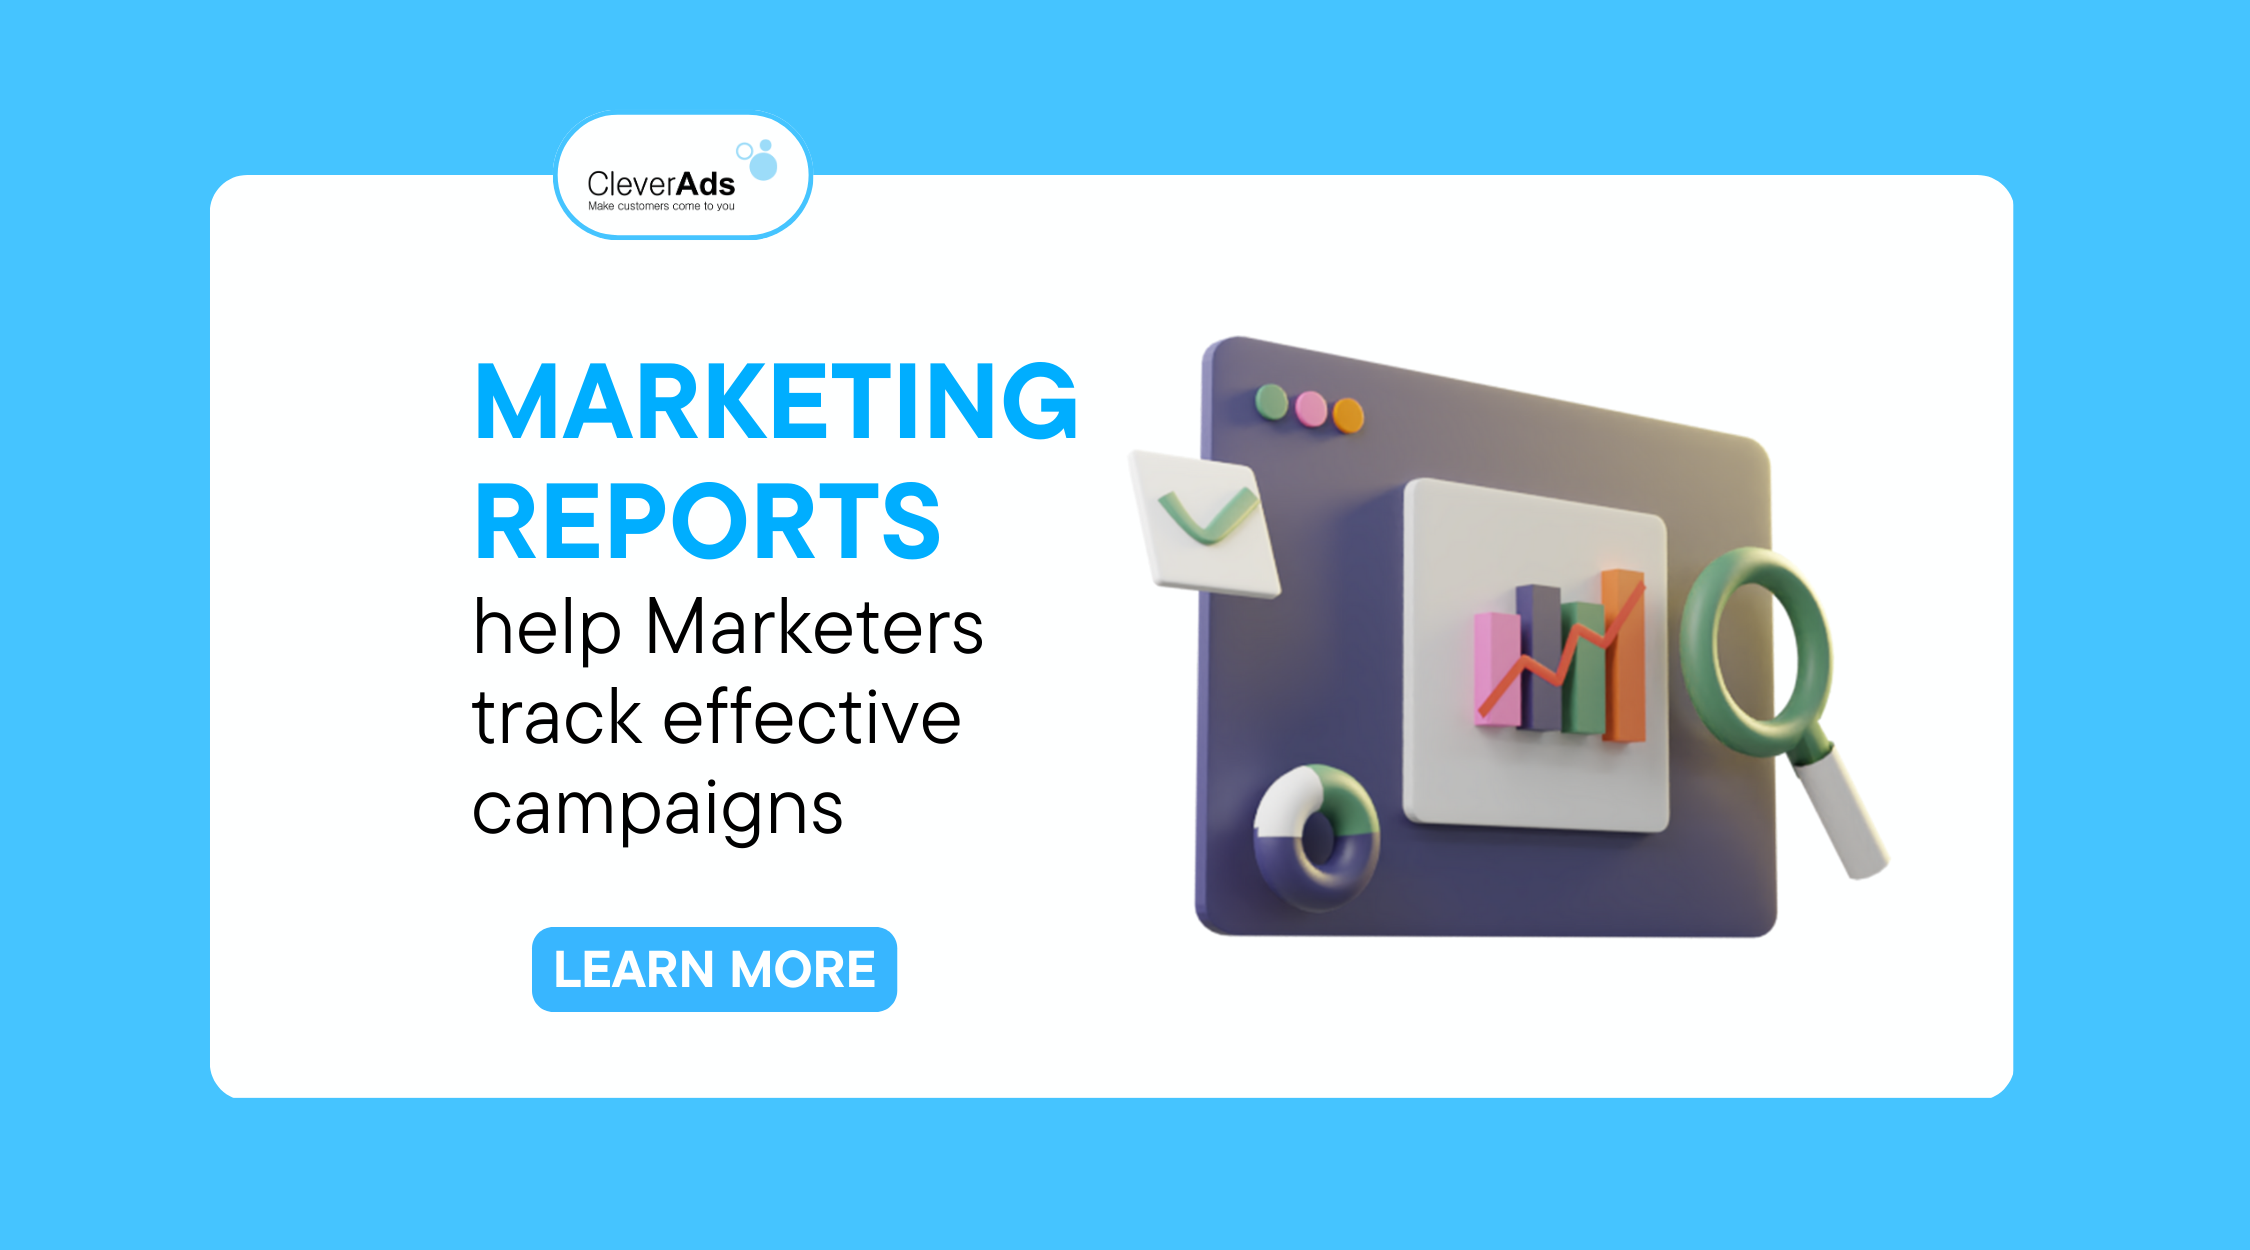 Marketing reports help Marketers track effective campaigns